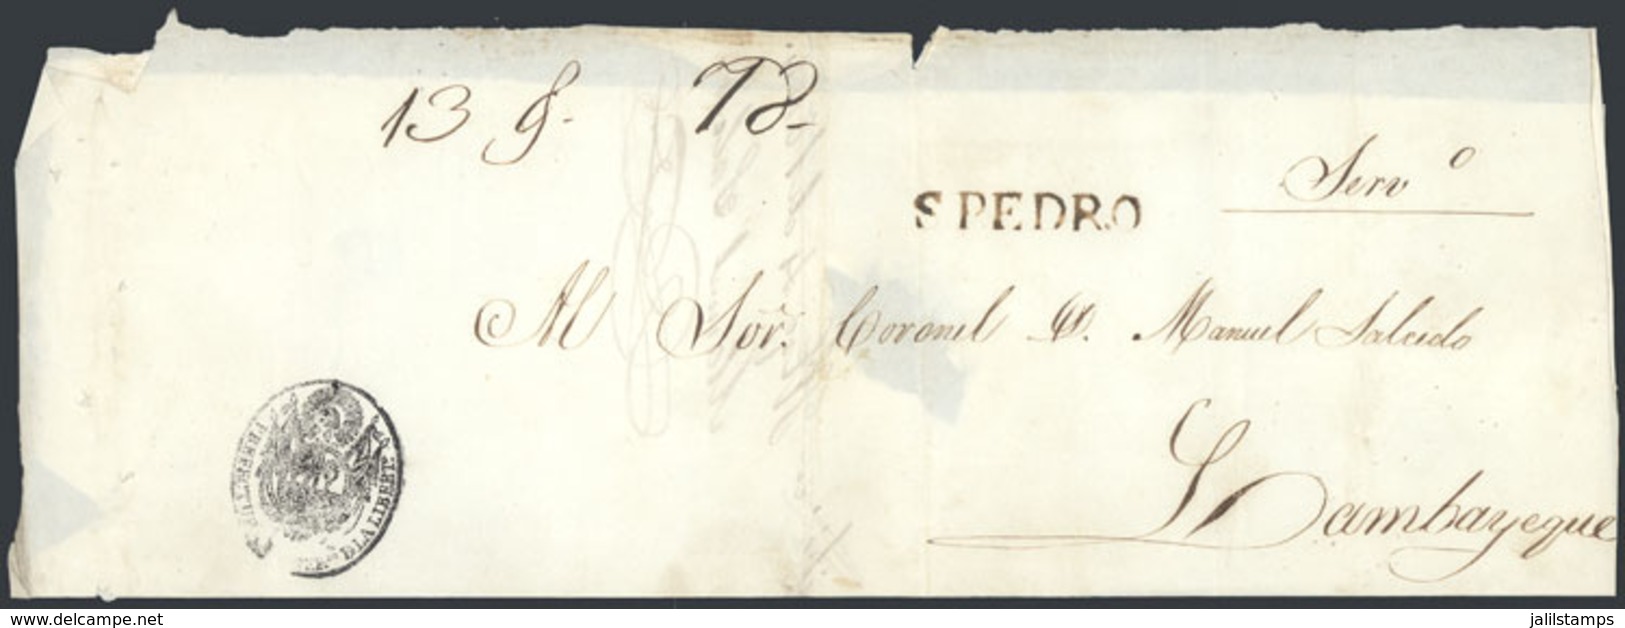 PERU: Official Folded Cover Sent To Lambayeque In 1844, With Straightline Black "S.PEDRO" Mark Perfectly Applied, Very F - Peru